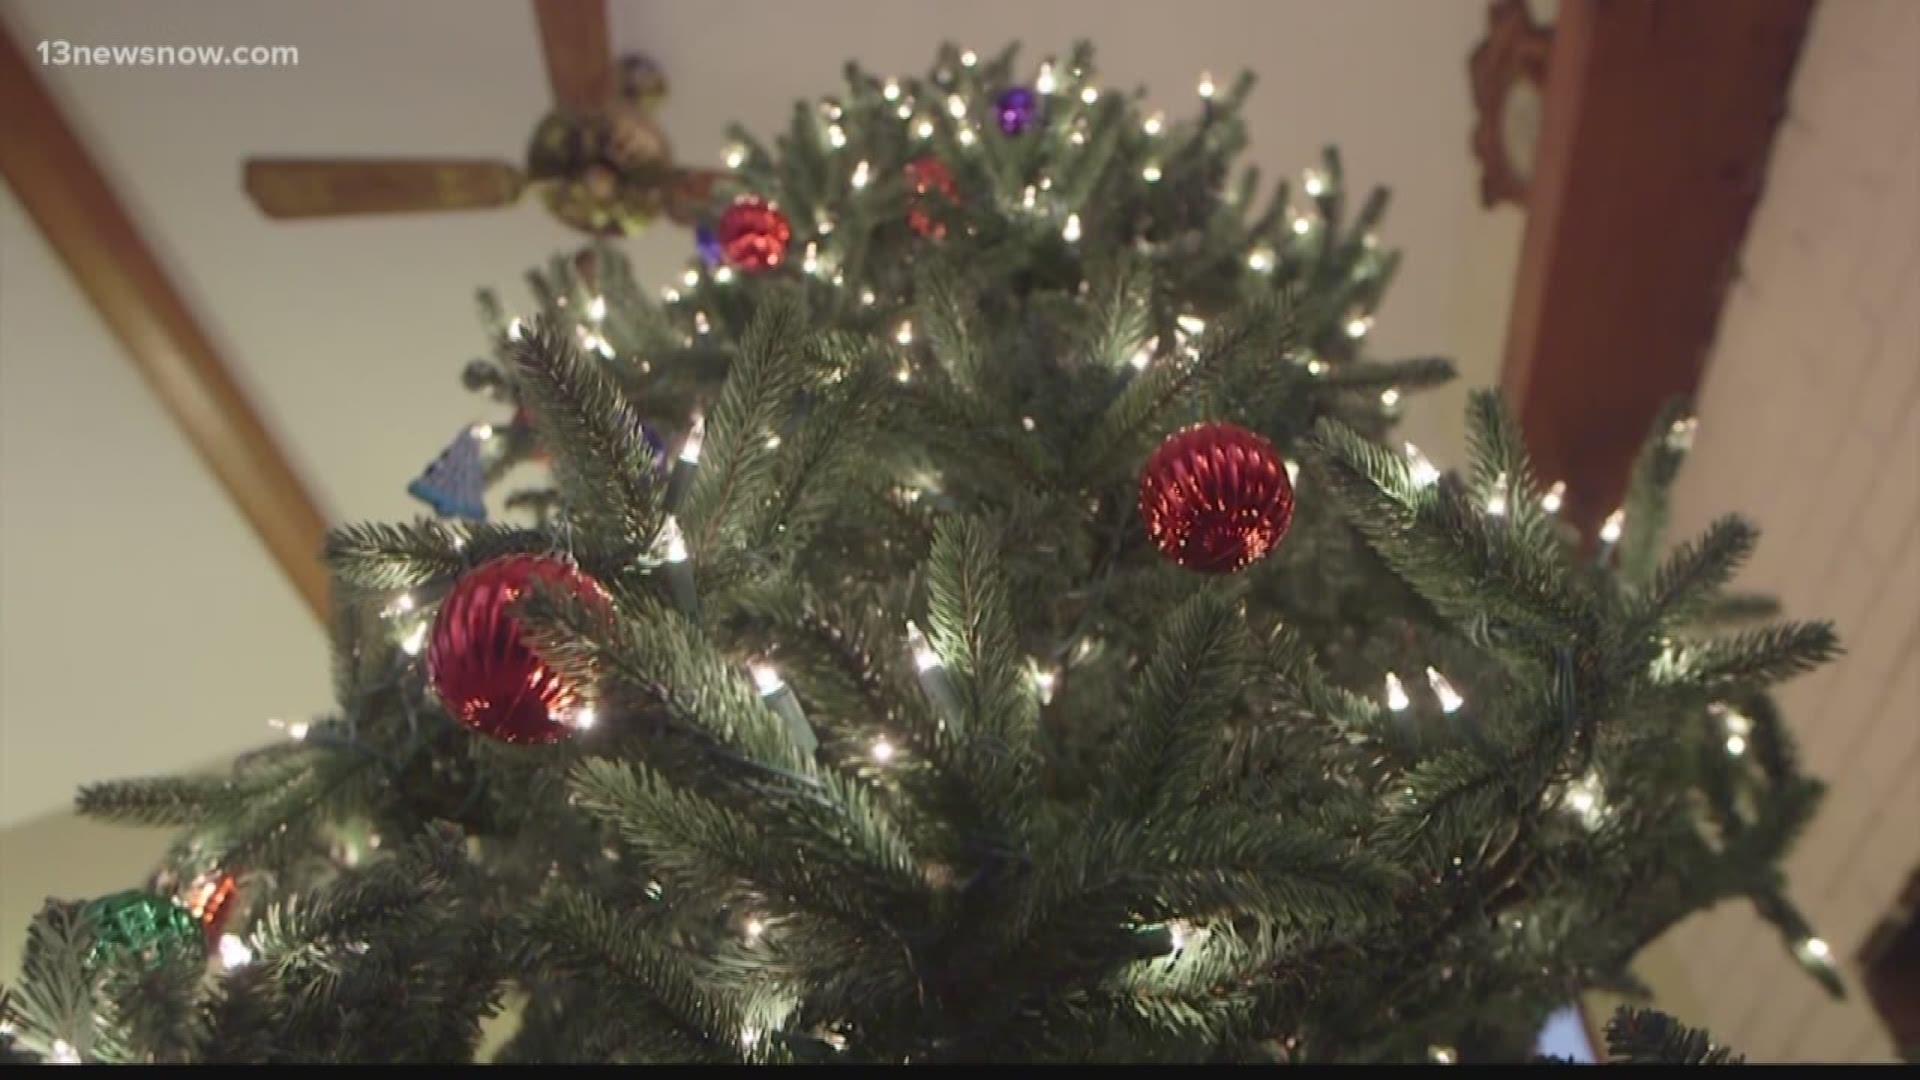 Art Kohn, spokesperson for the VBFD, said homeowners should take down Christmas trees by New Year's Day at the very latest.